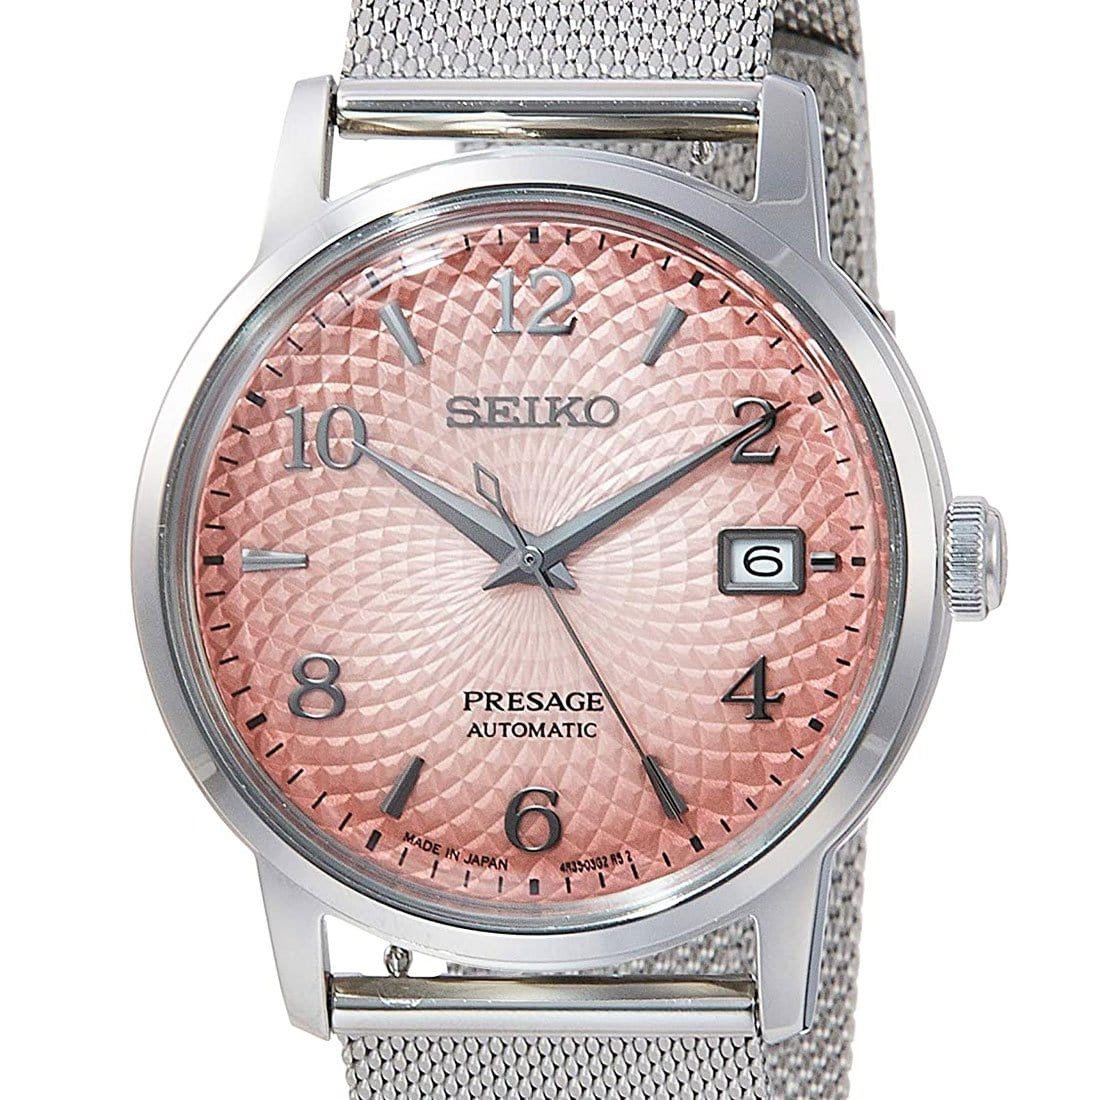 SARY169 Seiko Presage Automatic Limited Edition Cocktail Time Mesh Band JDM Watch